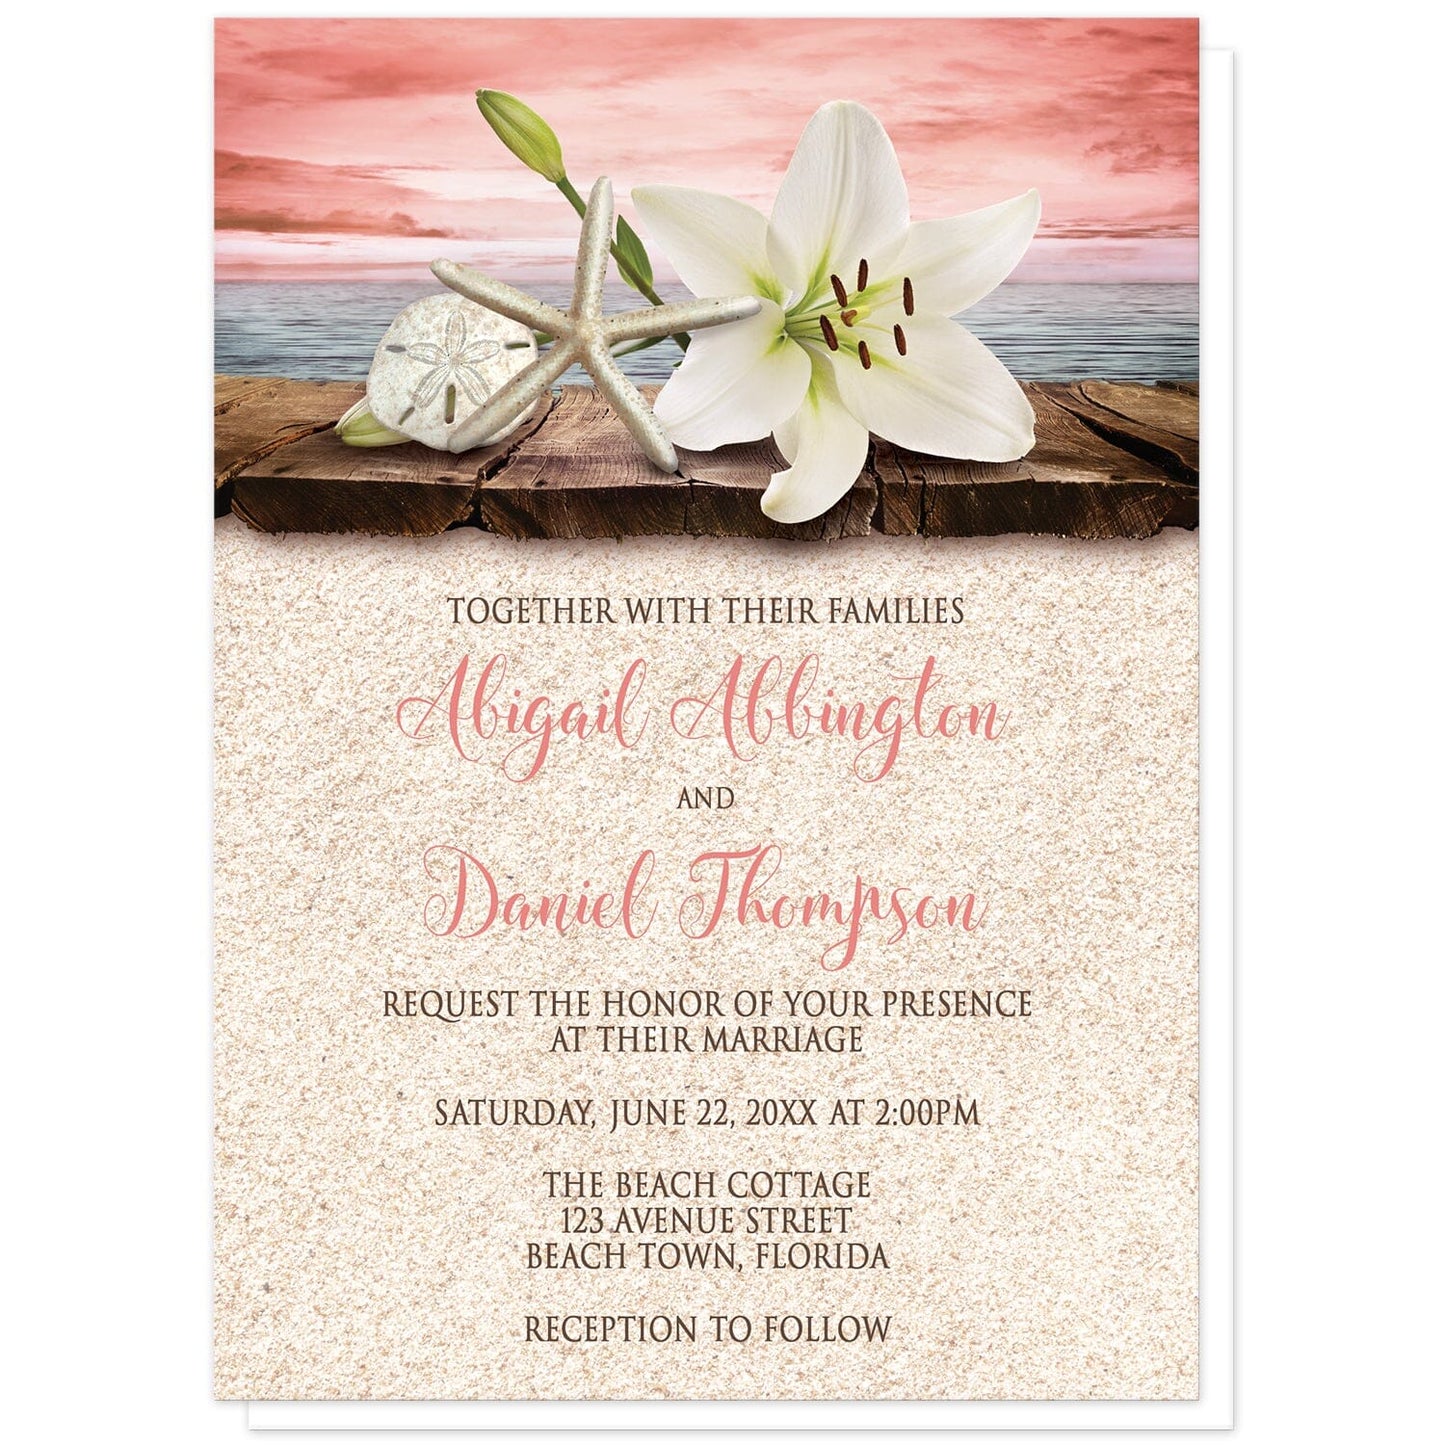 Lily Seashells and Sand Coral Beach Wedding Invitations at Artistically Invited. Tropical lily seashells and sand coral beach wedding invitations with an elegant white lily, a starfish, and a sand dollar on a rustic wood dock overlooking the open water under a coral sky. Your personalized marriage celebration details are custom printed in dark brown and coral over a beige sand background design below the lily and seashells.